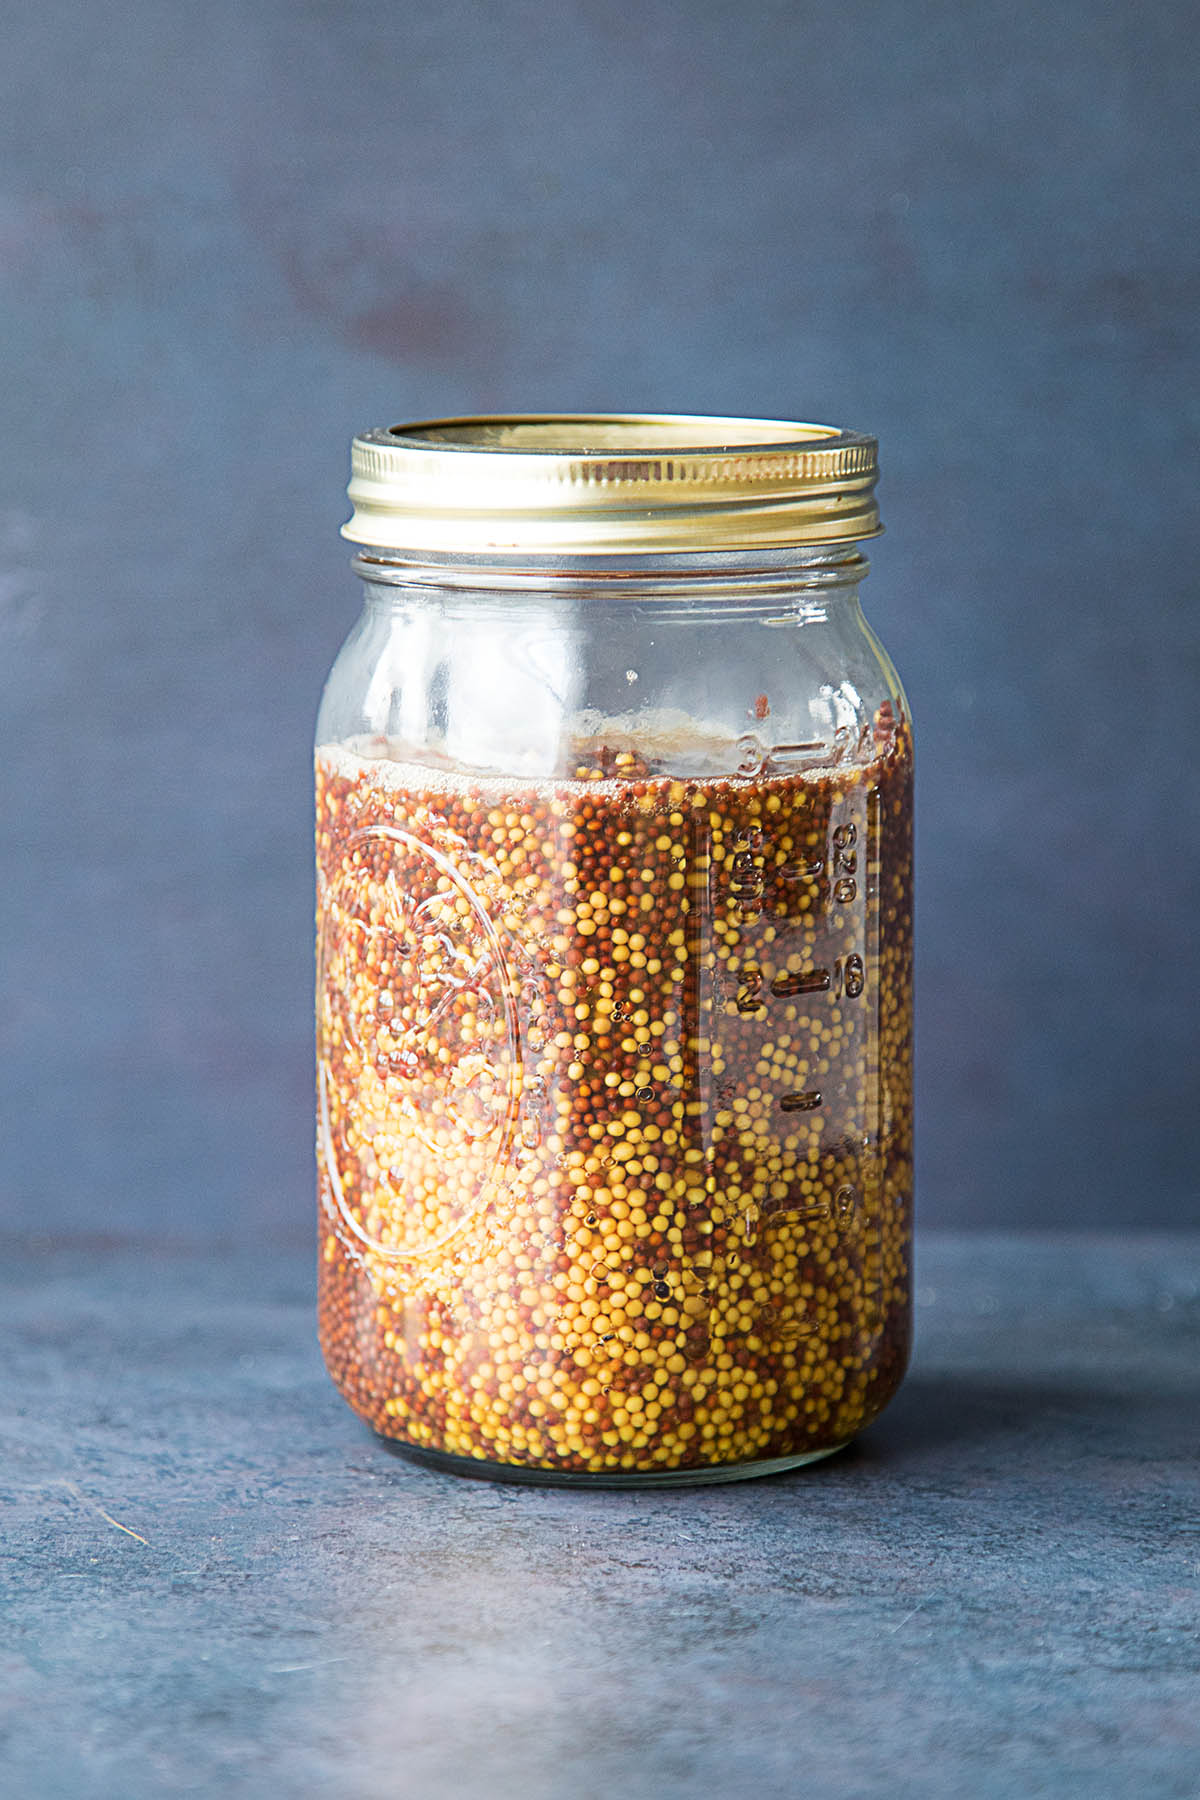 Roasted Hatch Chile-Beer Mustard in a jar looking delicious